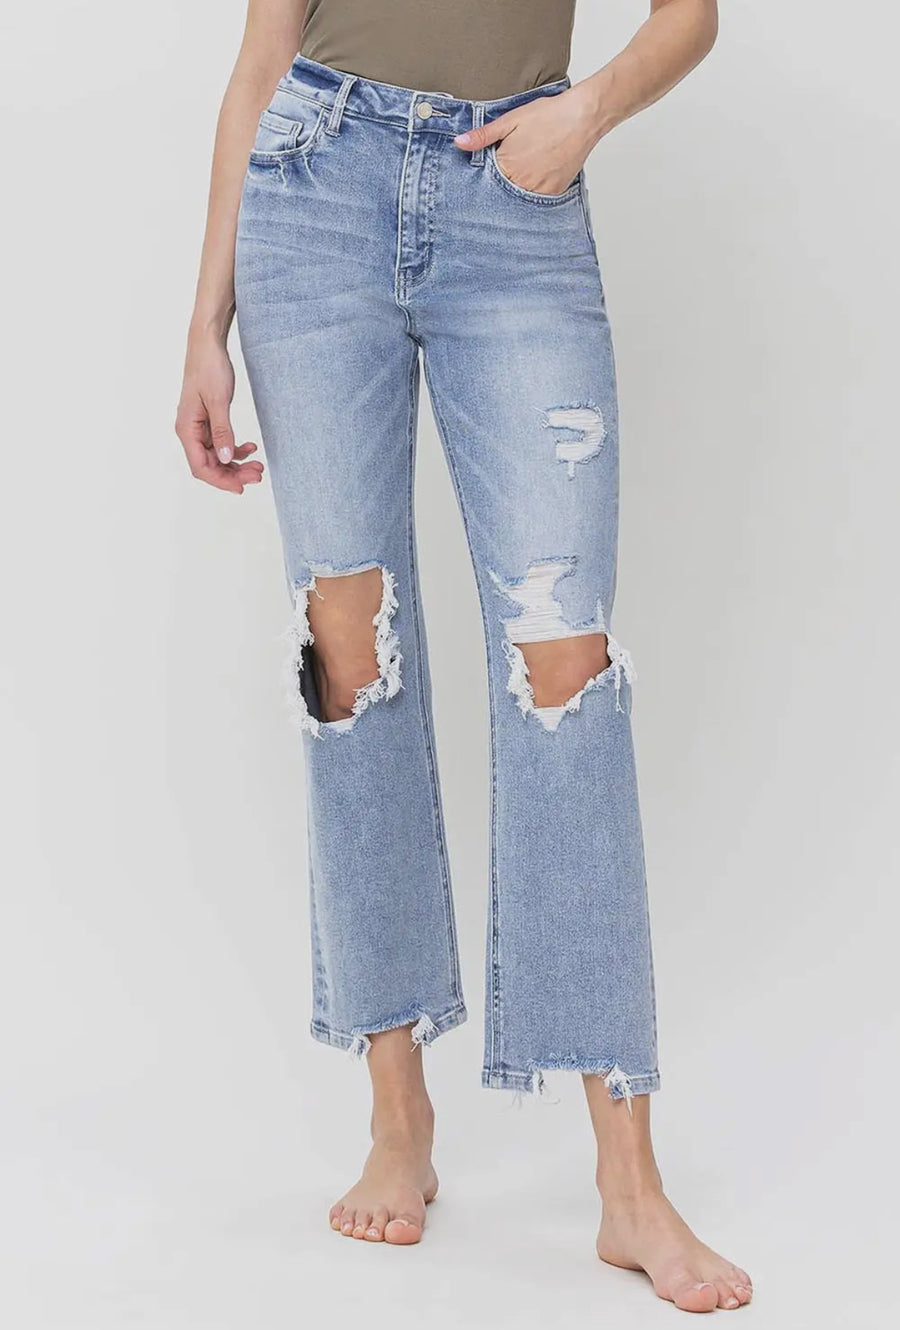 Irving Jeans